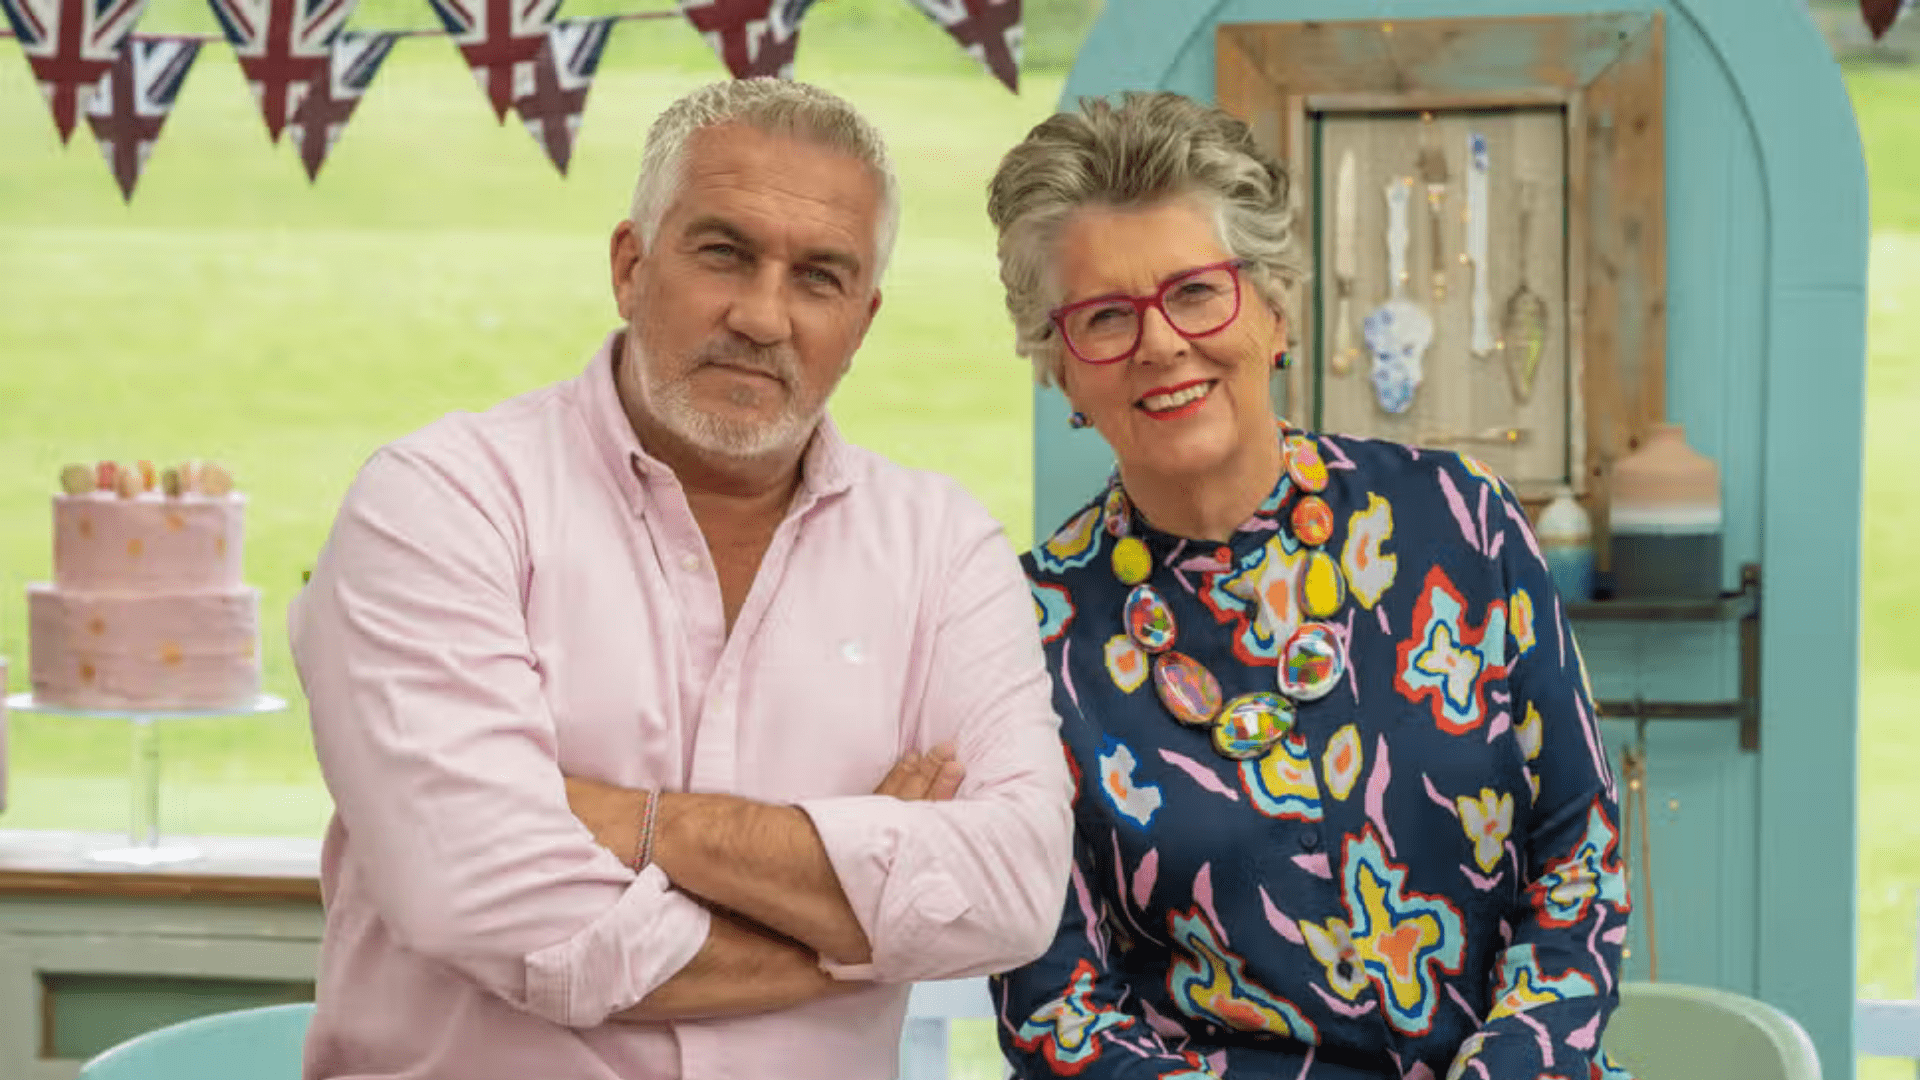 The Great British Bake Off Facts - 46 The Great British Bake Off Facts All The Star Bakers Should Know